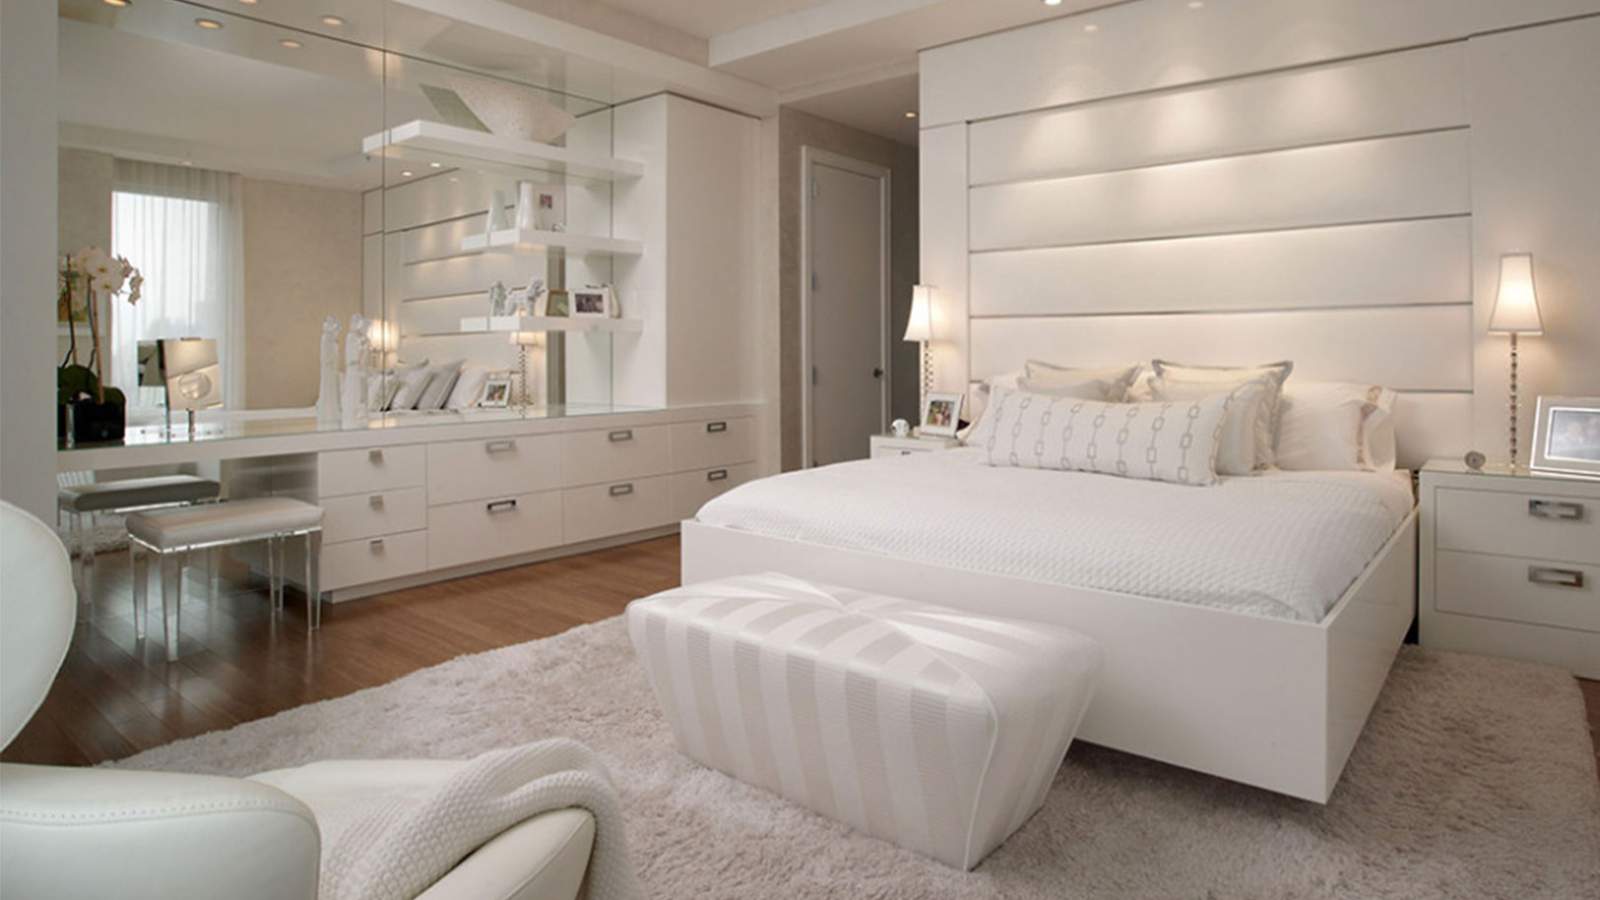 17 Amazing Bedroom Ideas For Create A Vibrant And Relaxing Atmosphere